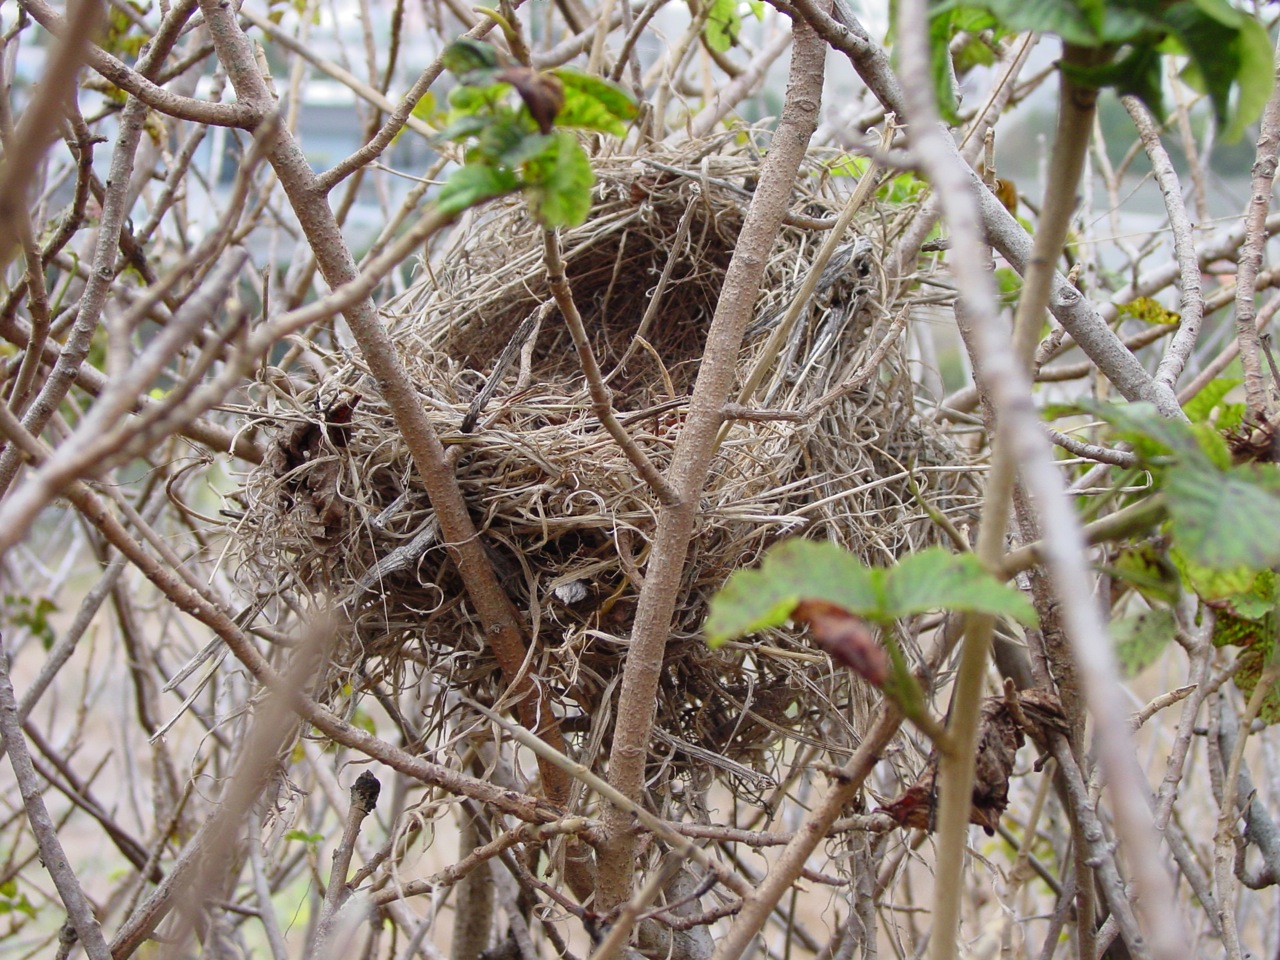 This a picture of a bird's nest in a poison oak plant. 